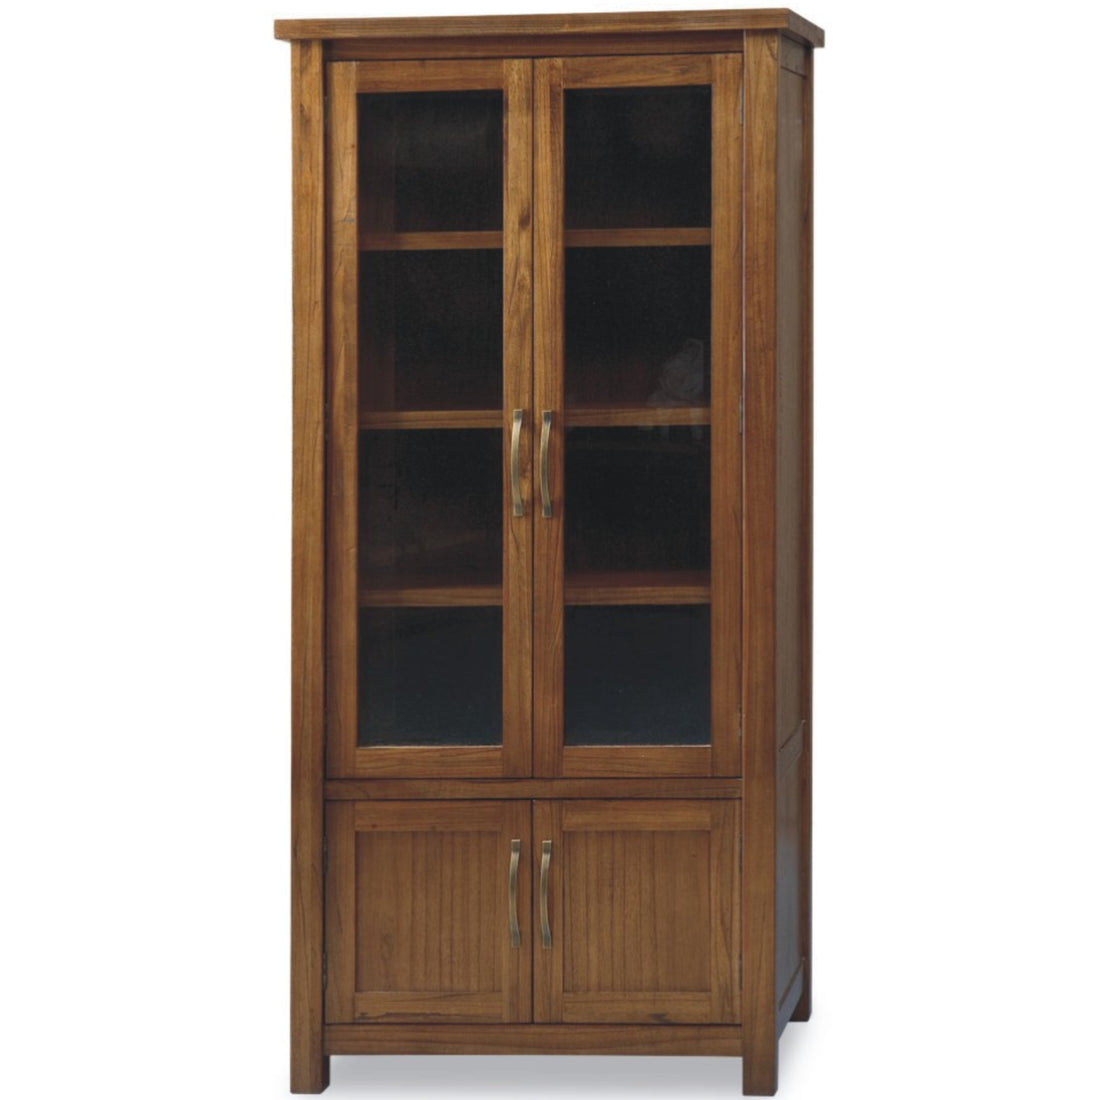 Birdsville Display Unit Glass Door Bookcase Solid Mt Ash Timber Wood - Brown-Bookcases &amp; Shelves-PEROZ Accessories